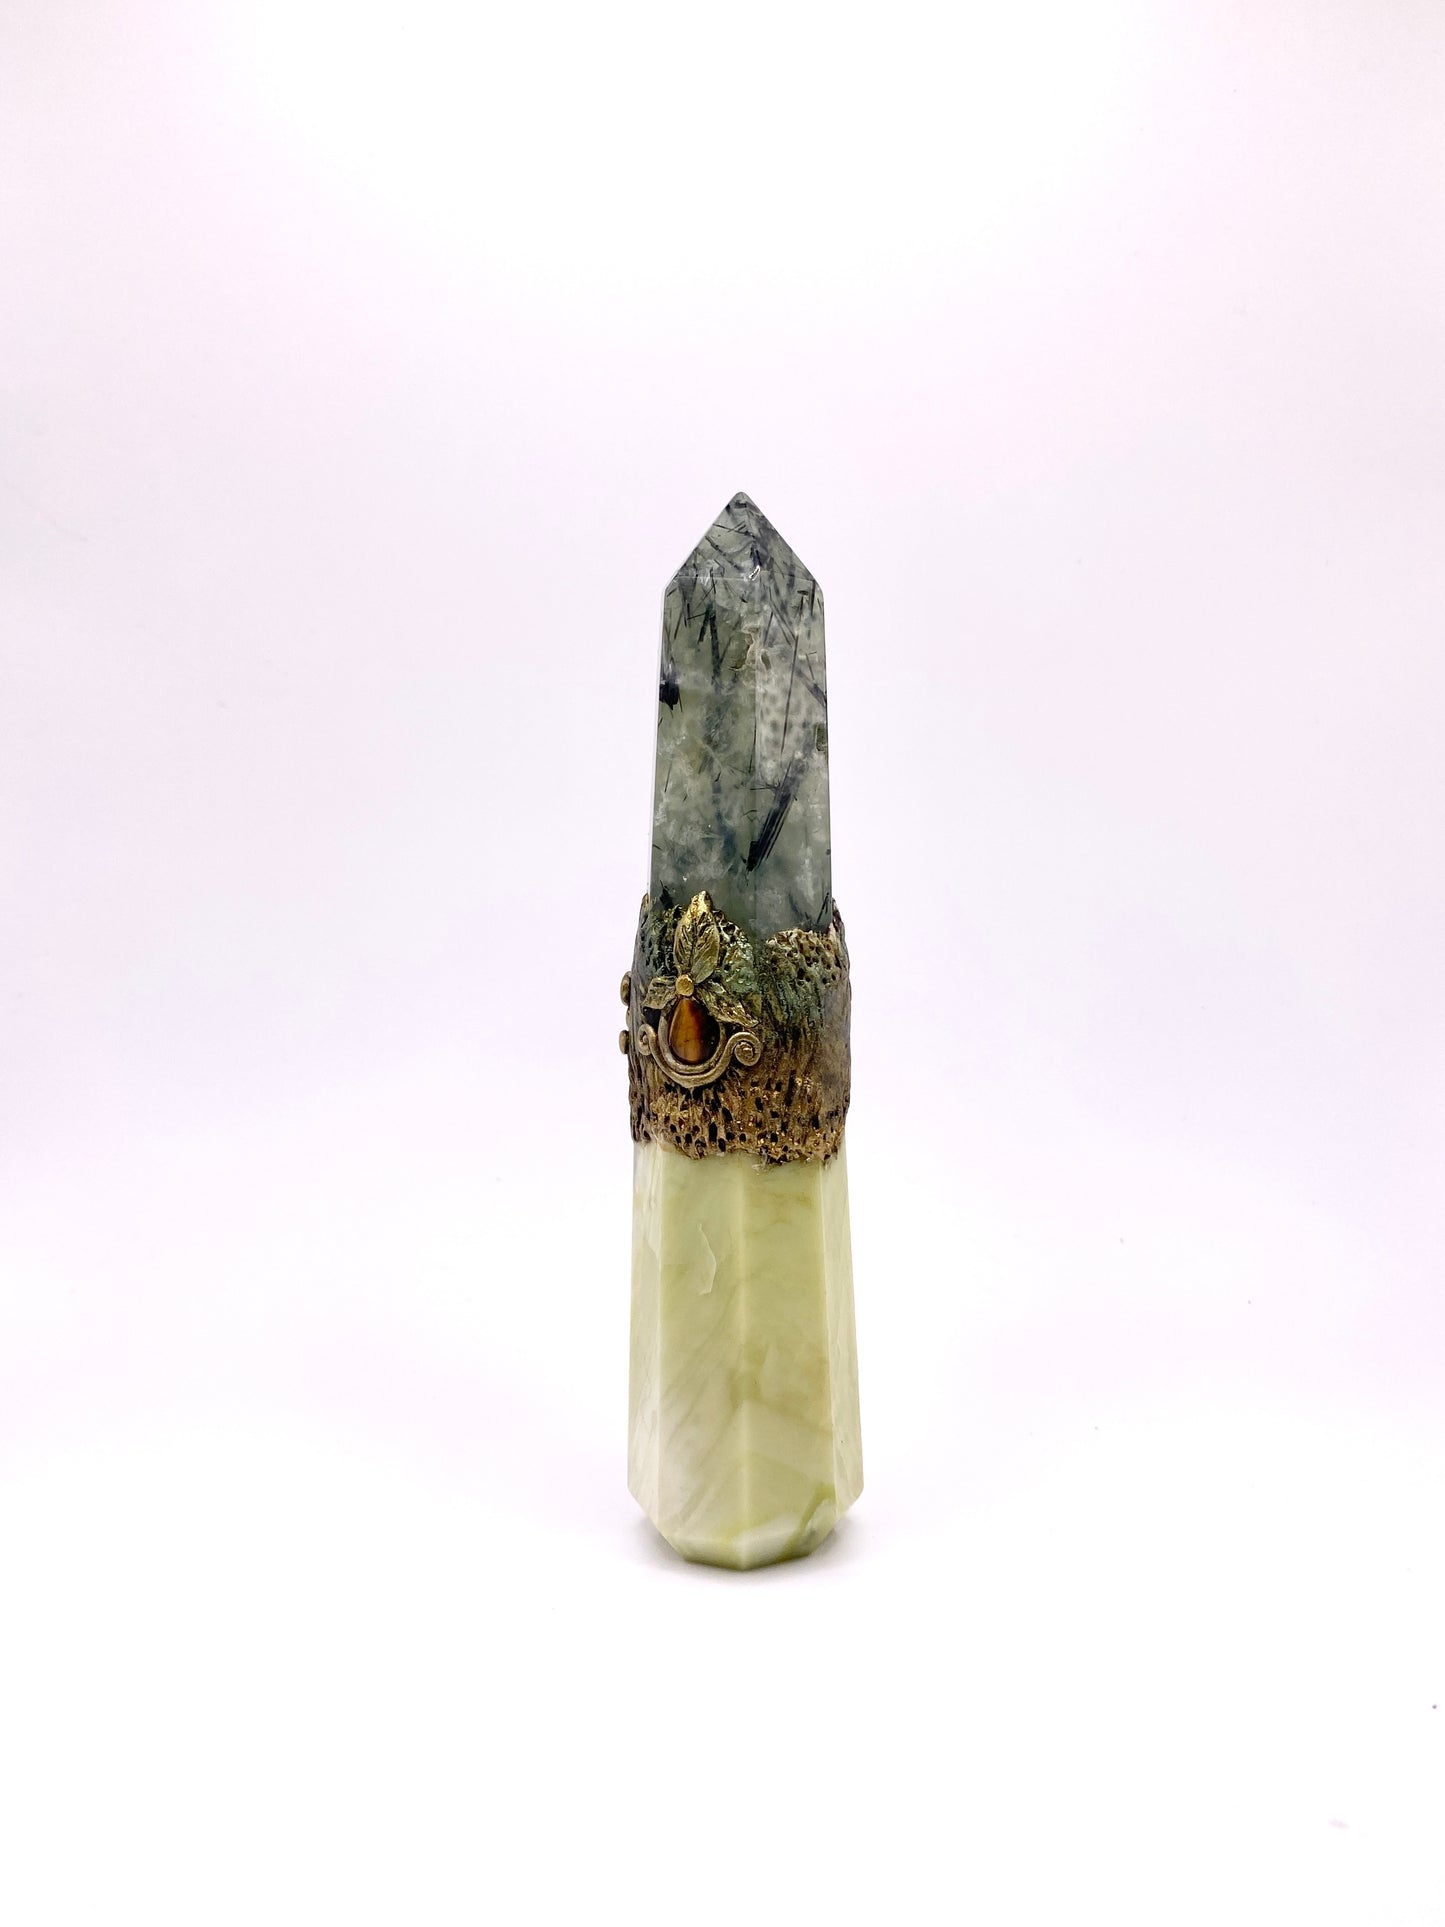 Crystal Energy Wand with Serpentine, Prehnite and Tigers Eye - Metaphysical Wand